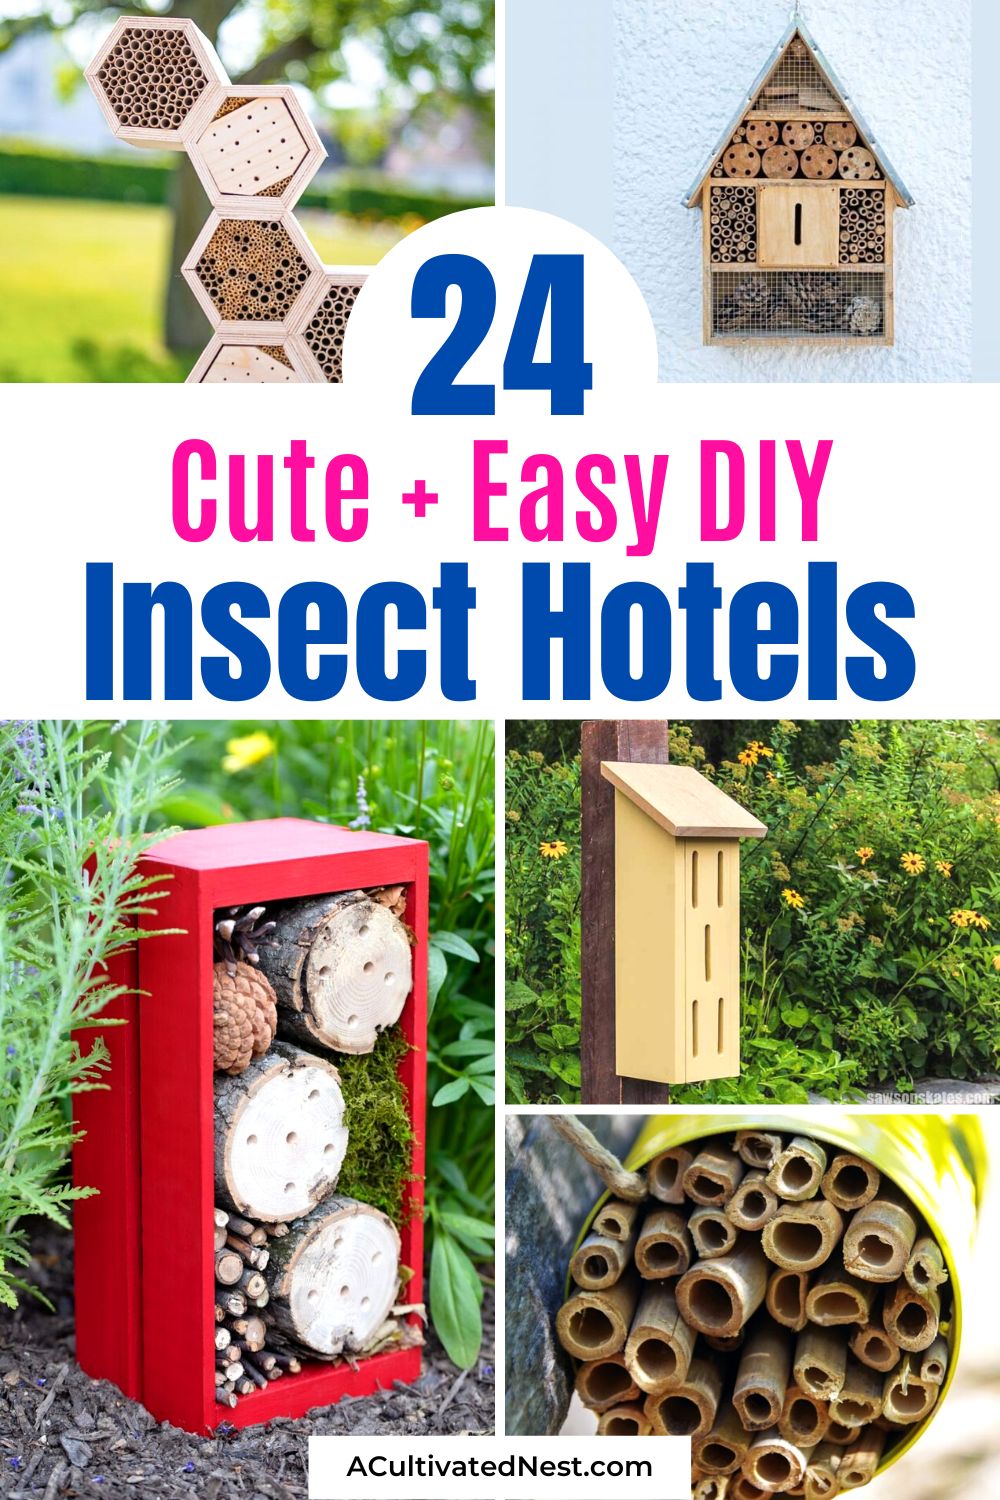 24 Easy and Cute DIY Insect Hotels- Transform your garden into a paradise for beneficial insects with these 24 cute and simple DIY insect hotels. From whimsical designs to functional structures, these projects will attract a variety of fascinating creatures. | #GardenInspiration #gardening #DIYProjects #gardenDIY #ACultivatedNest